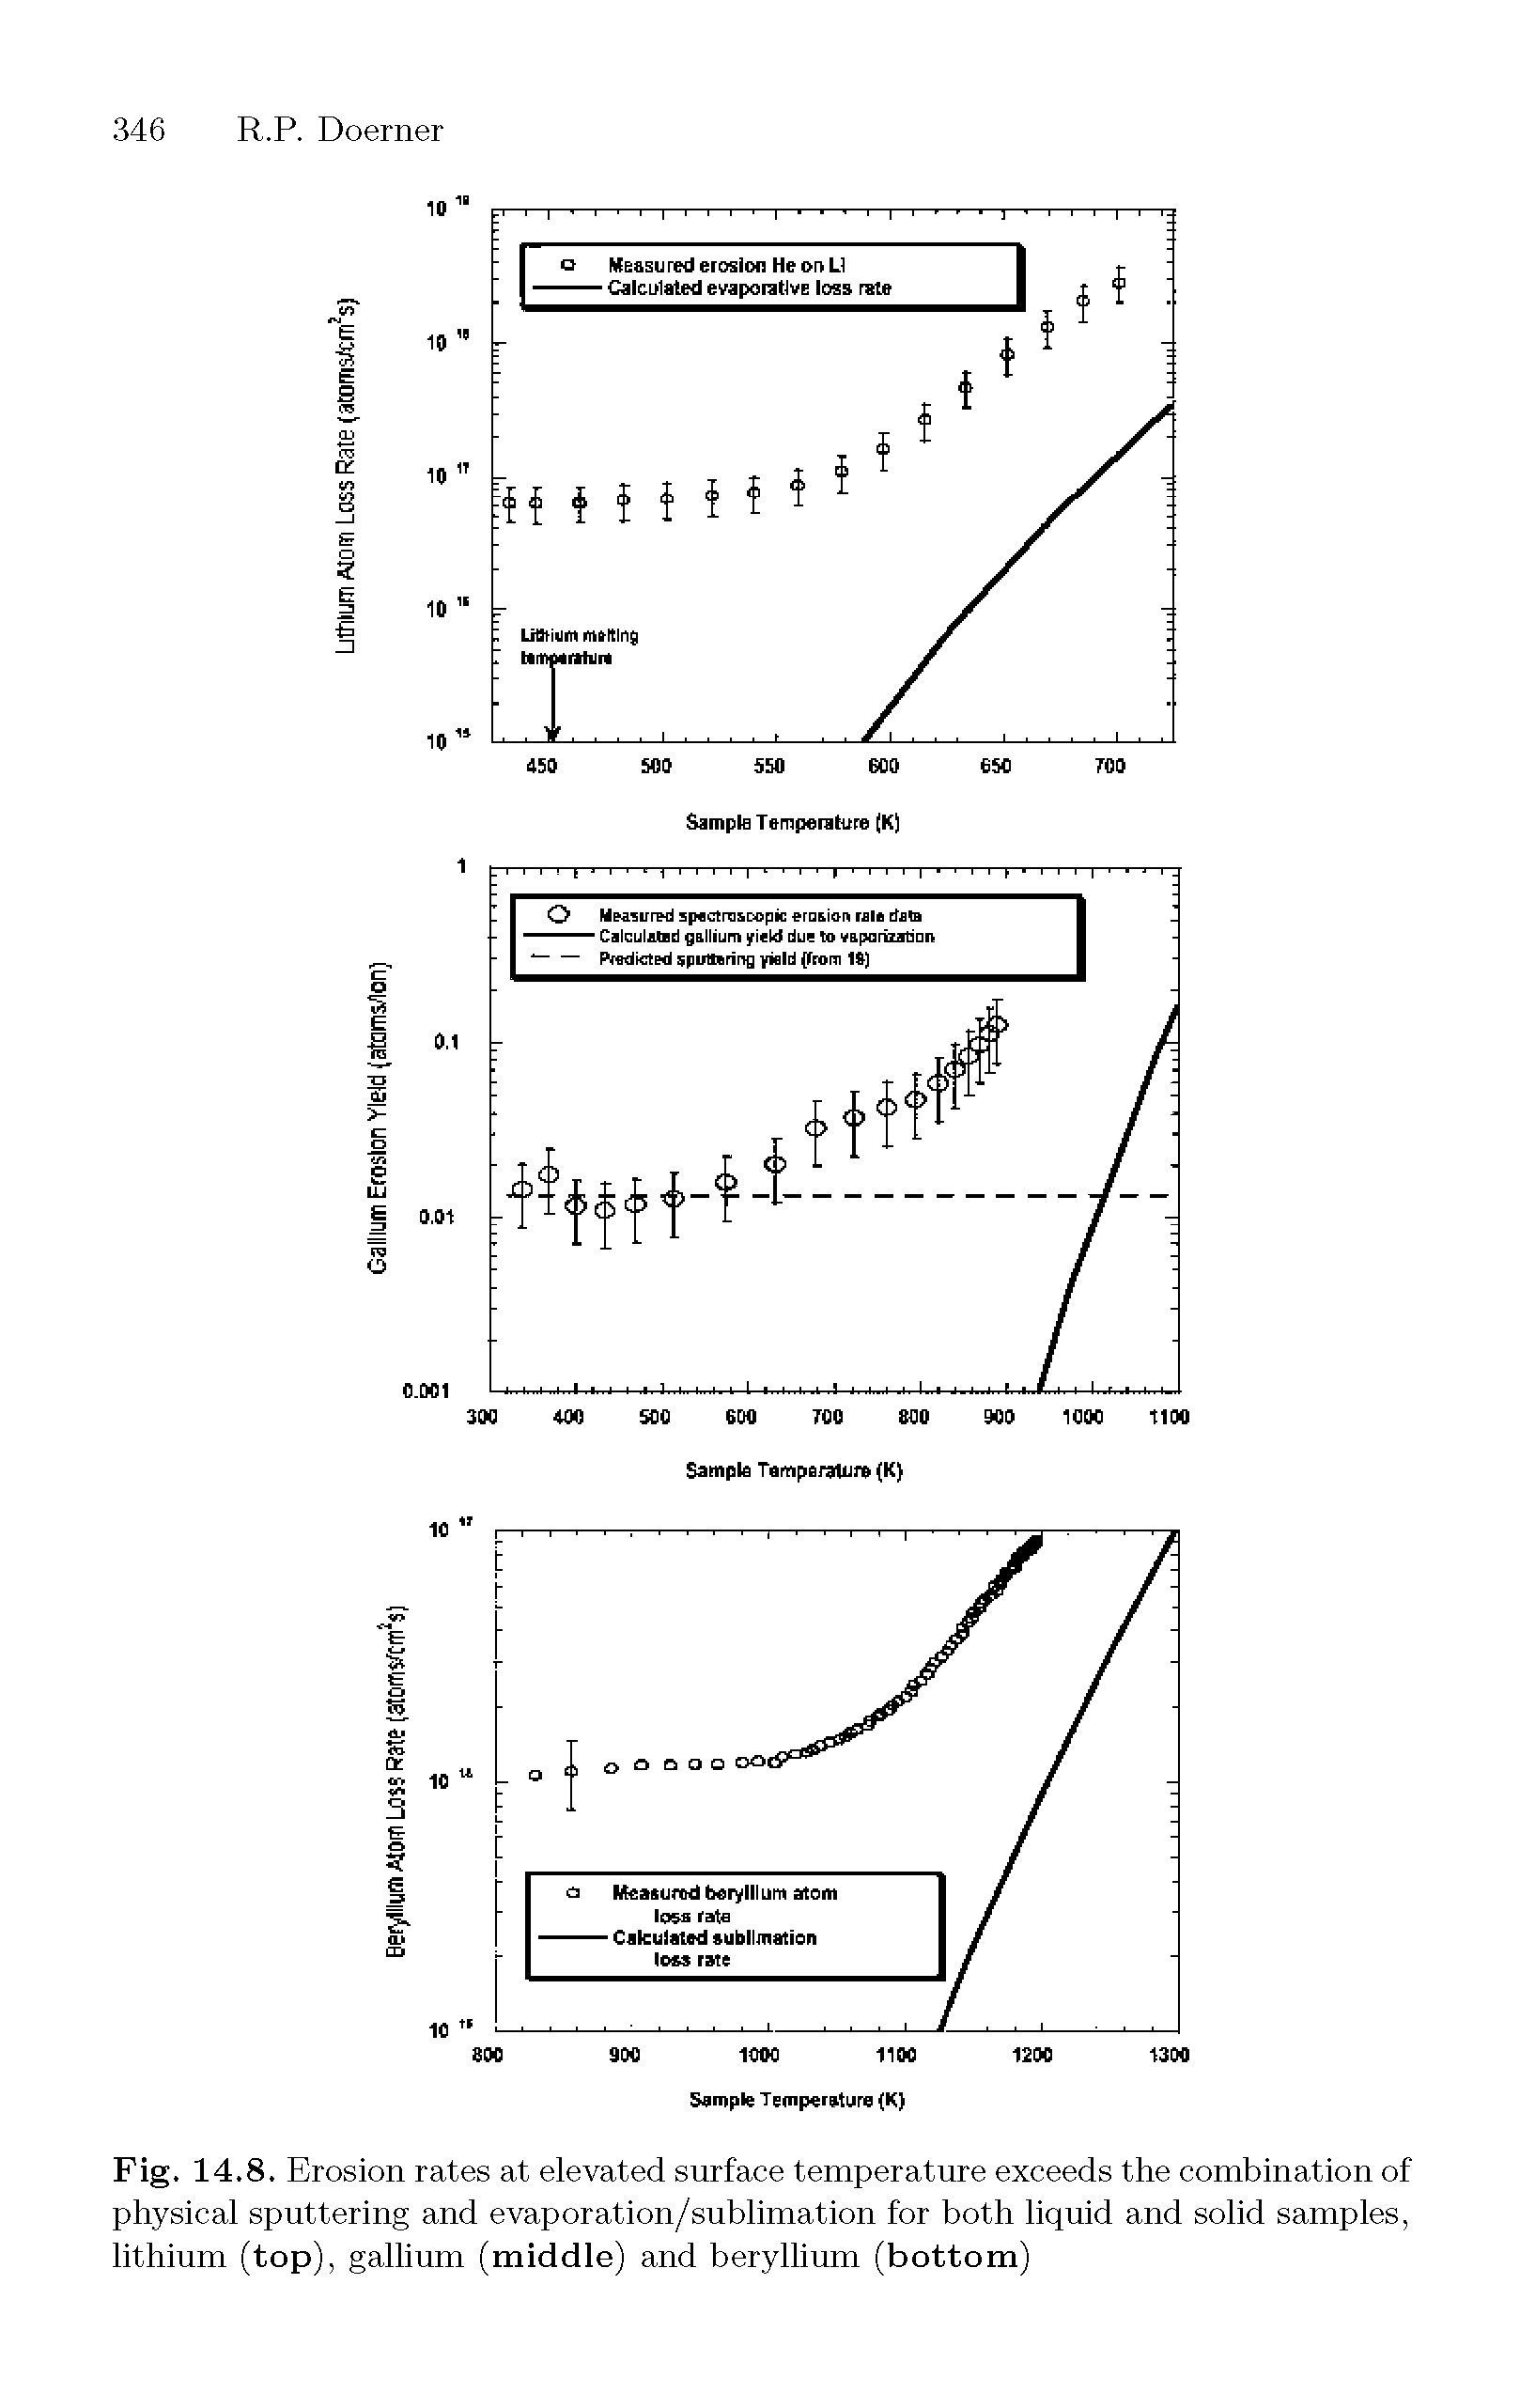 Fig. 14.8. Erosion rates at elevated surface temperature exceeds the combination of physical sputtering and evaporation/sublimation for both liquid and solid samples, lithium (top), gallium (middle) and beryllium (bottom)...